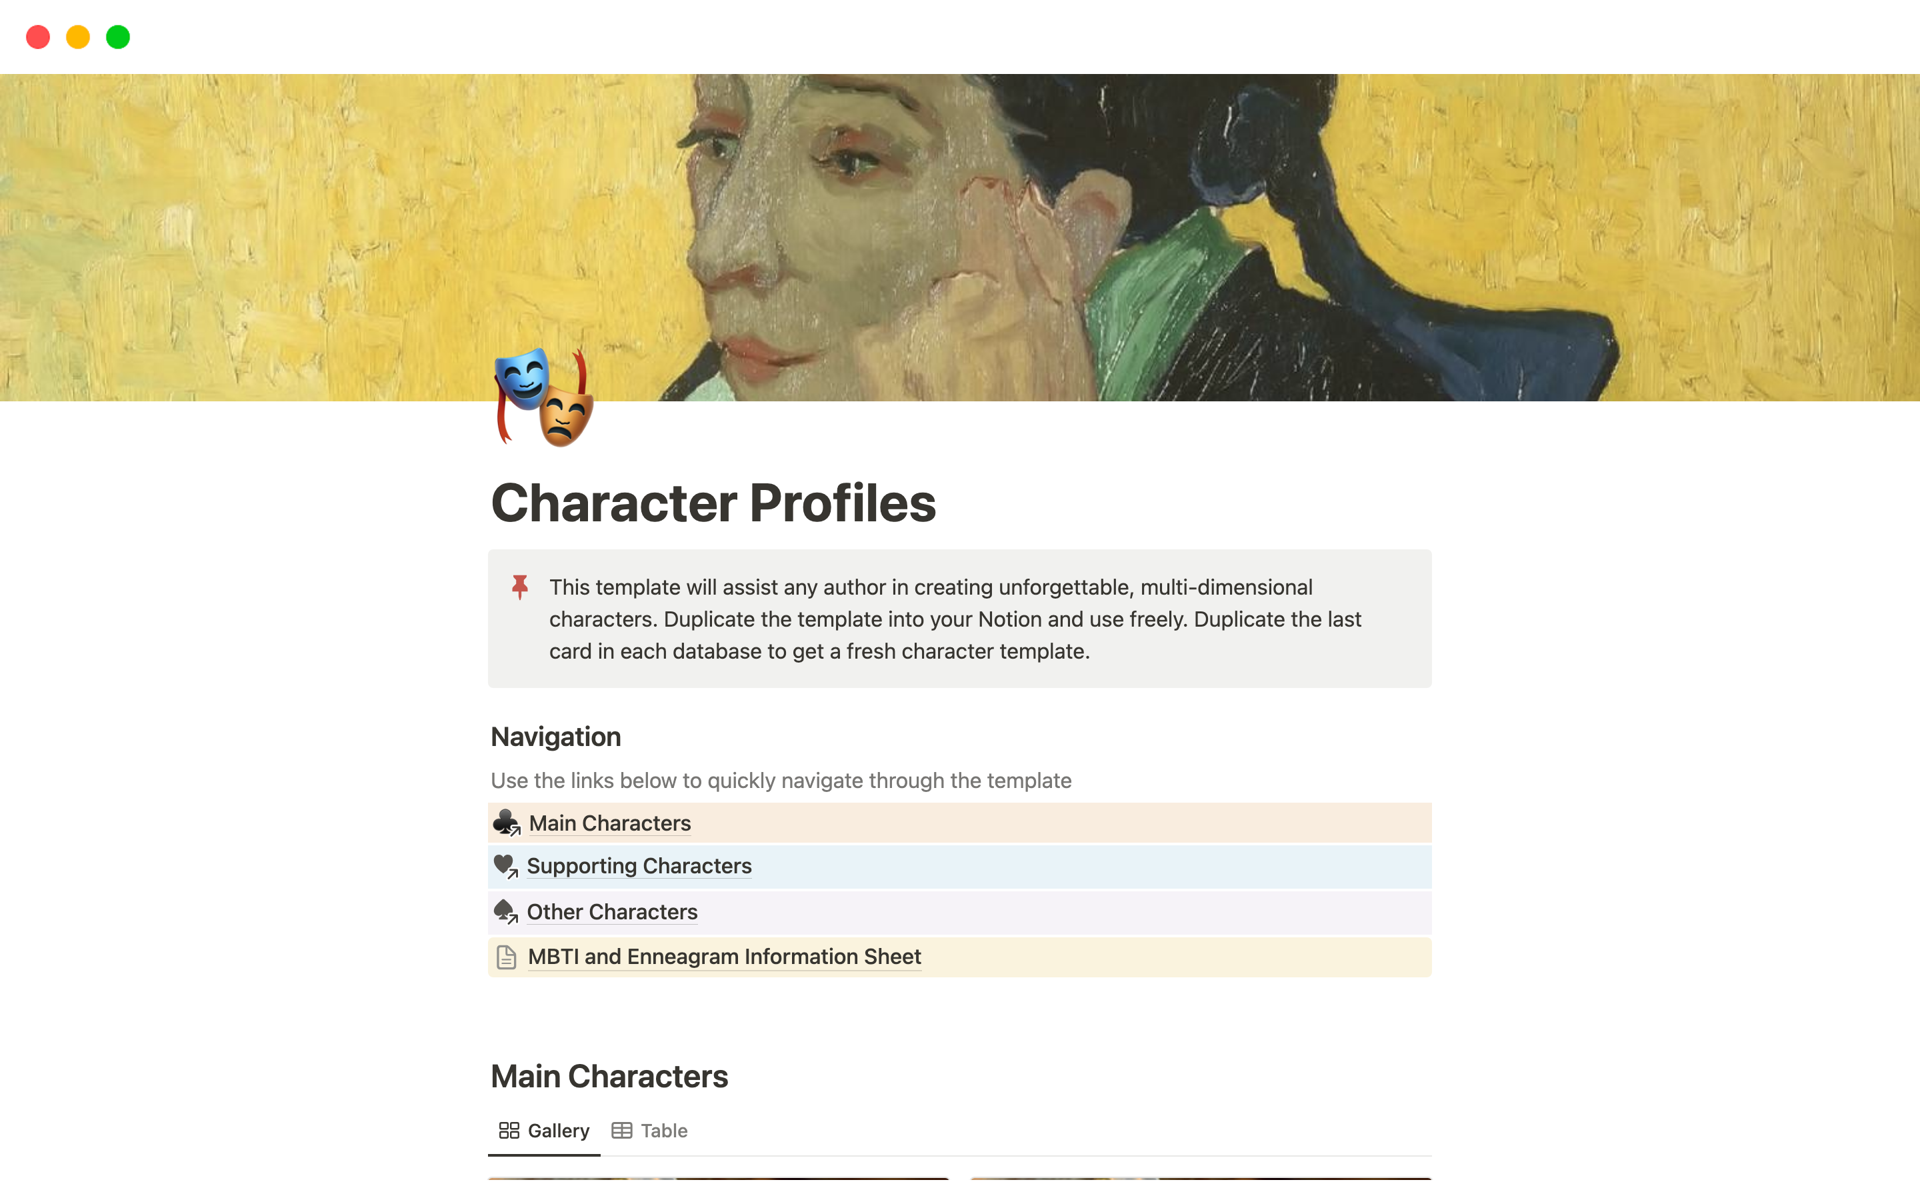 This template will assist any author in creating unforgettable, multi-dimensional characters. 